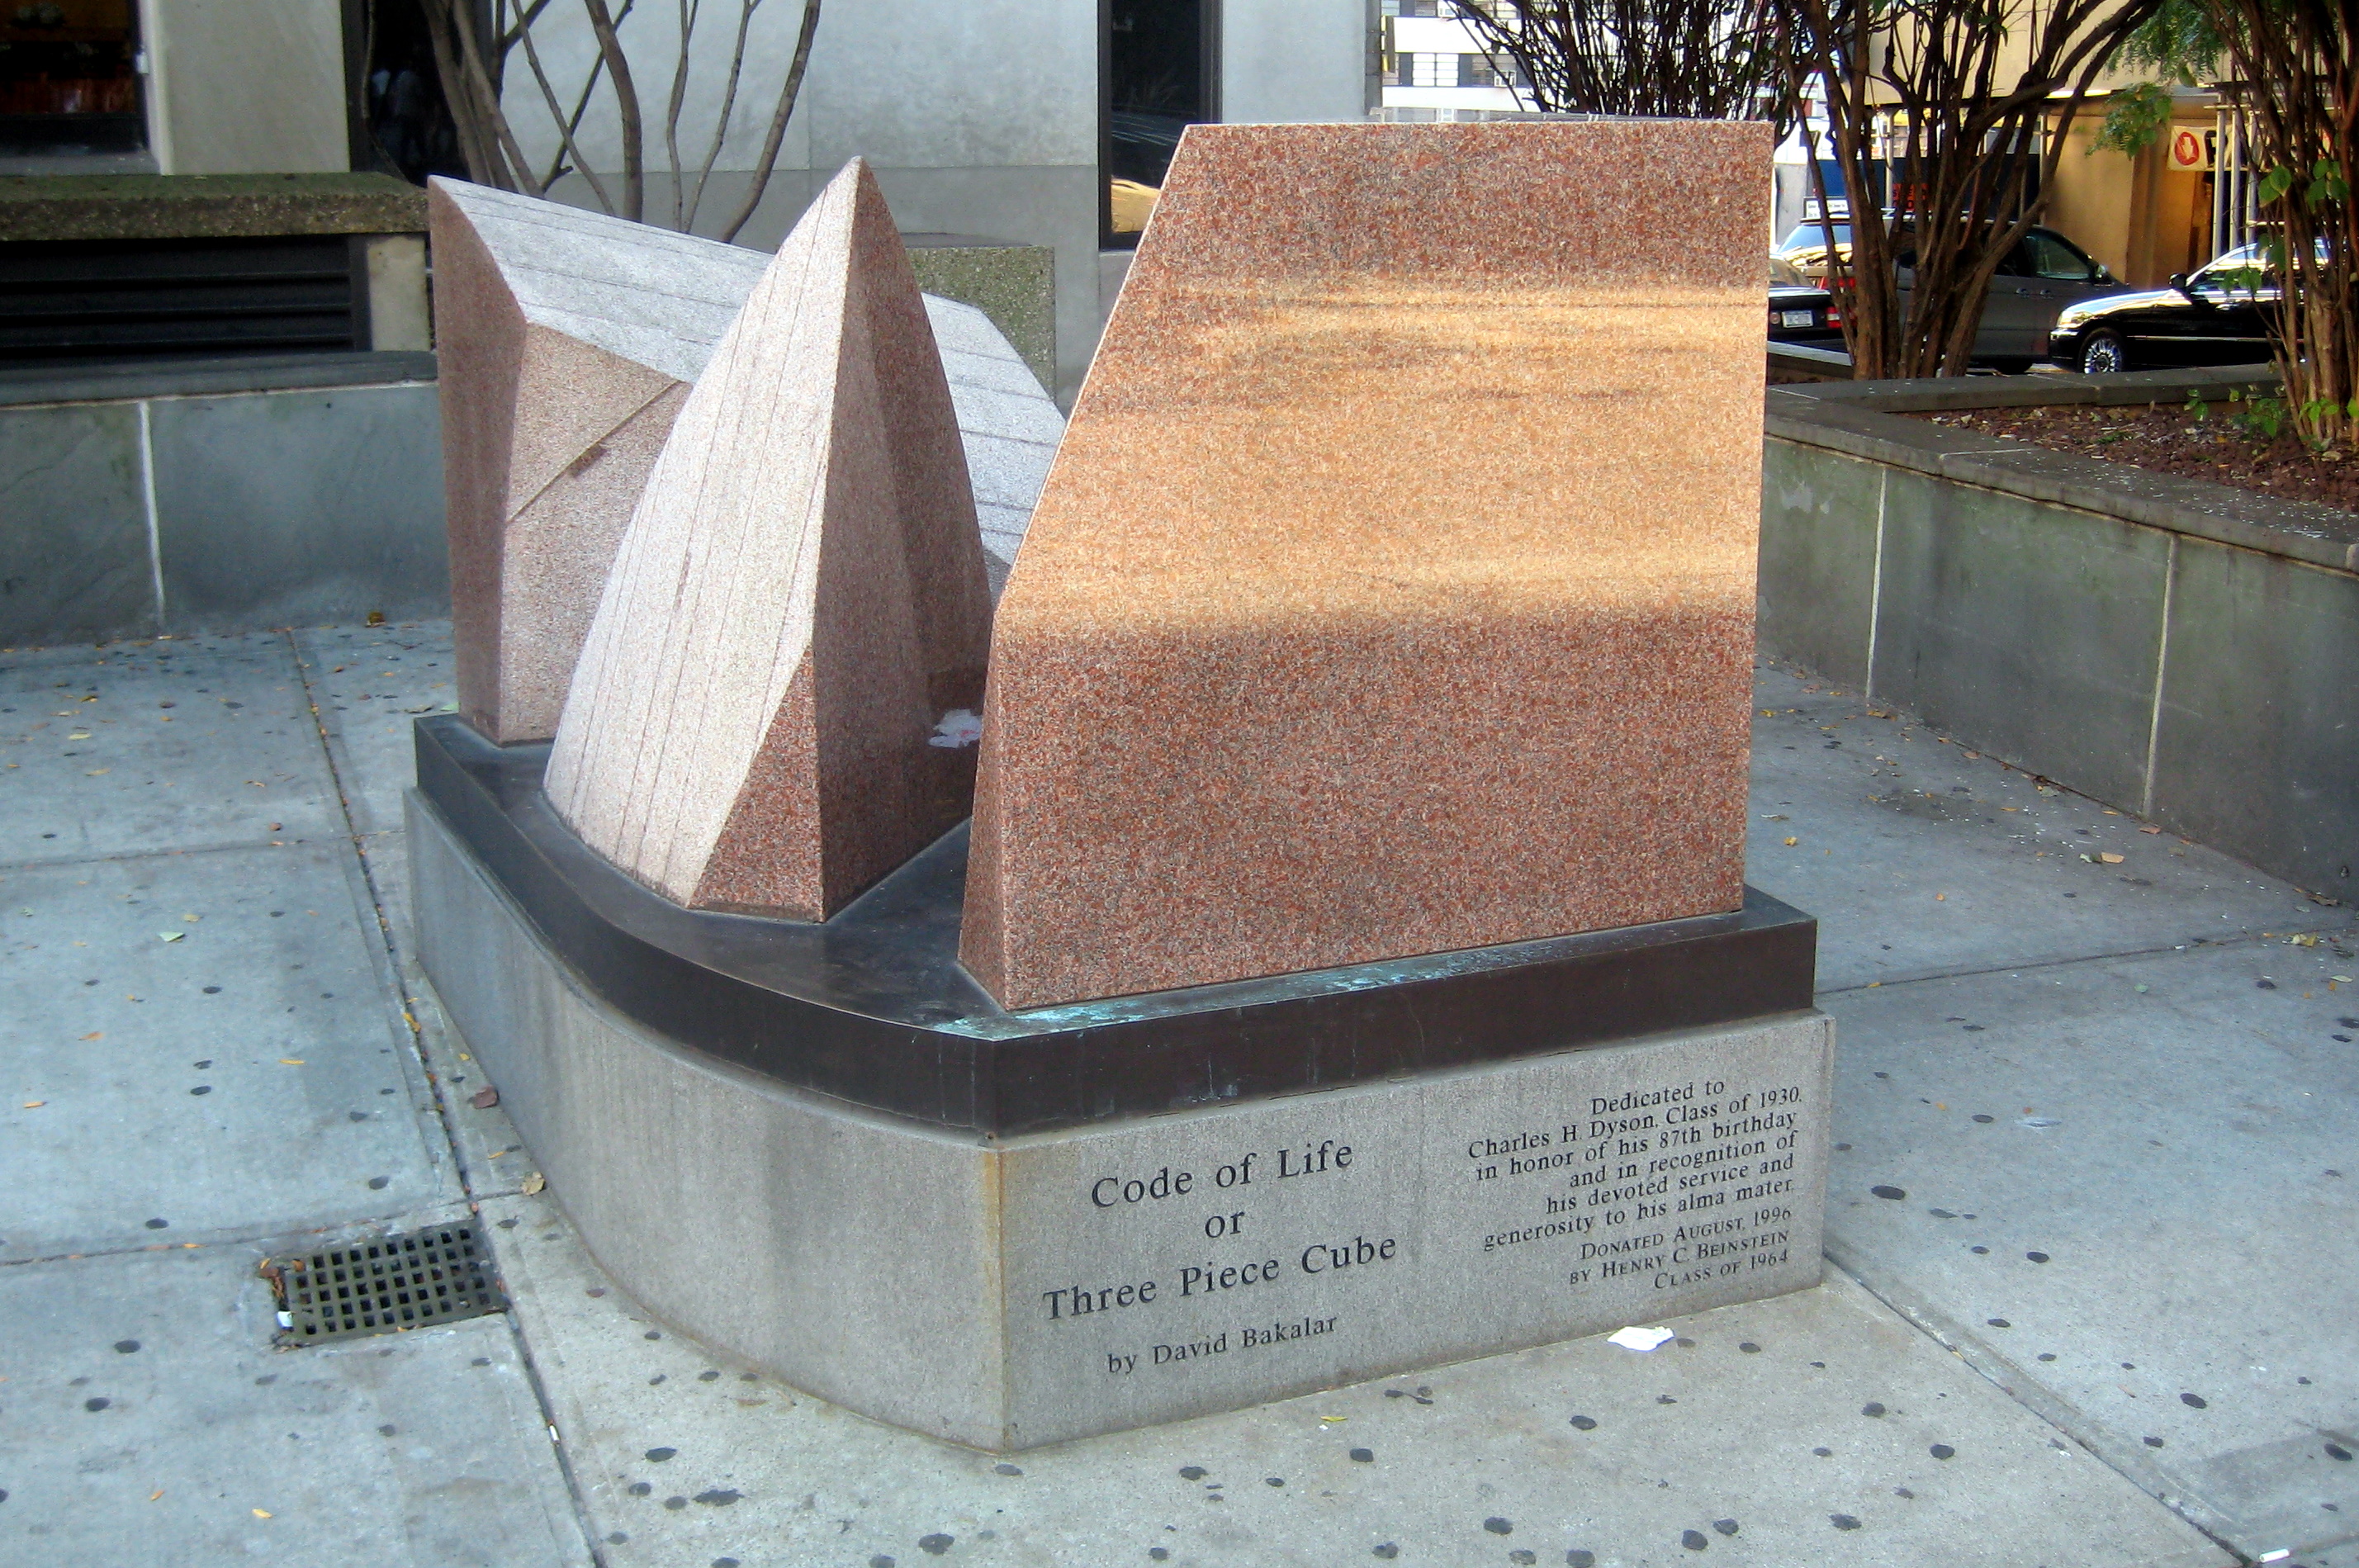 NYC - Pace University - Code of Life or Three Piece Cube The granite sculpture in front of the Pace Plaza building donated by alumnus Henry C. Beinstein '64 and designed by David Bakalar.